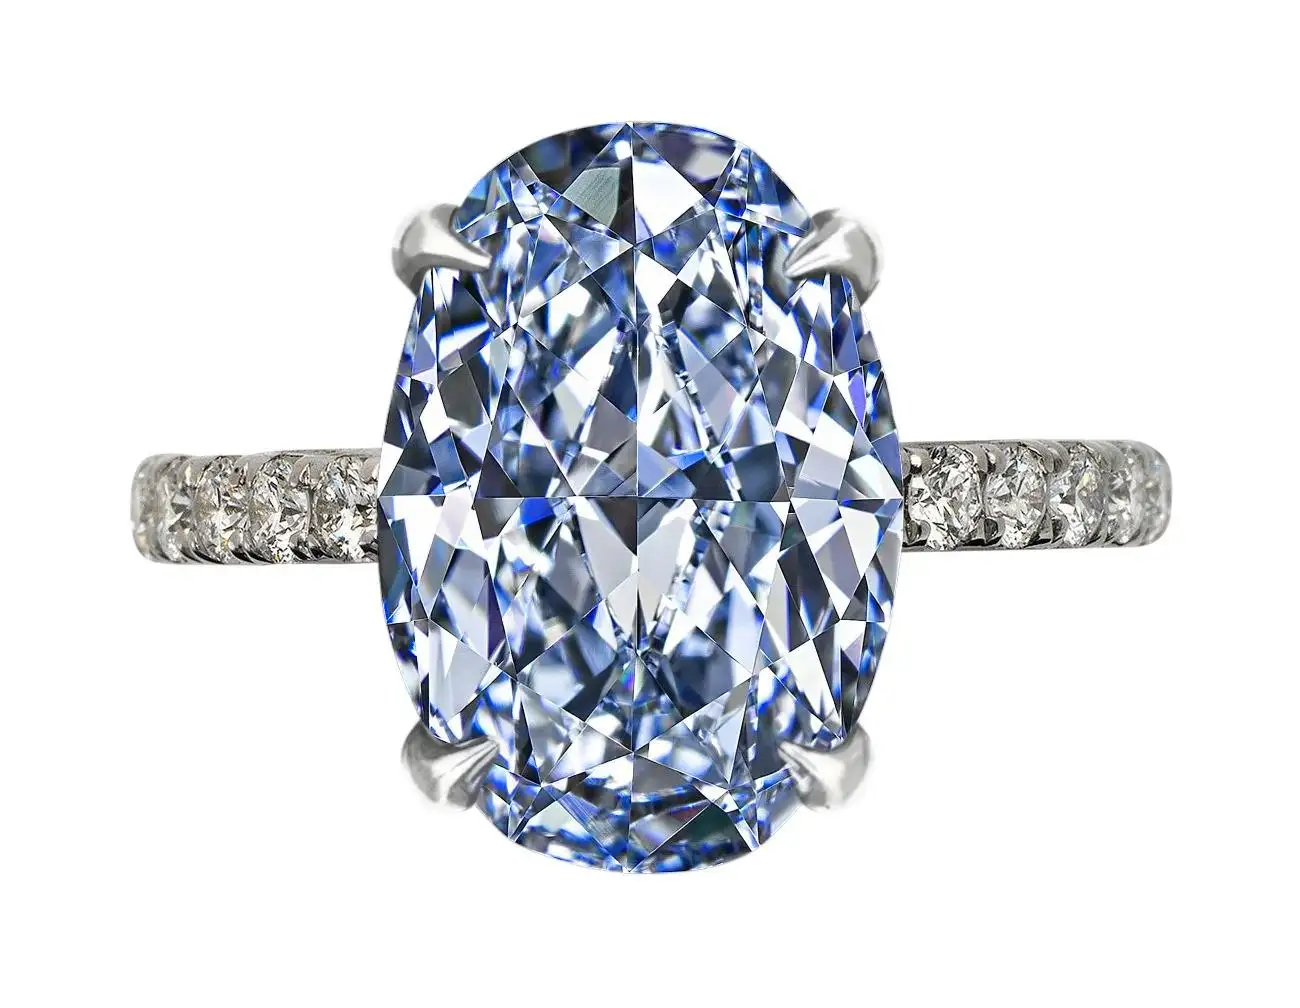 Exceptional-GIA-Certified-2-Carat-Fancy-Blue-Diamond-Solitaire-Ring-4.webp